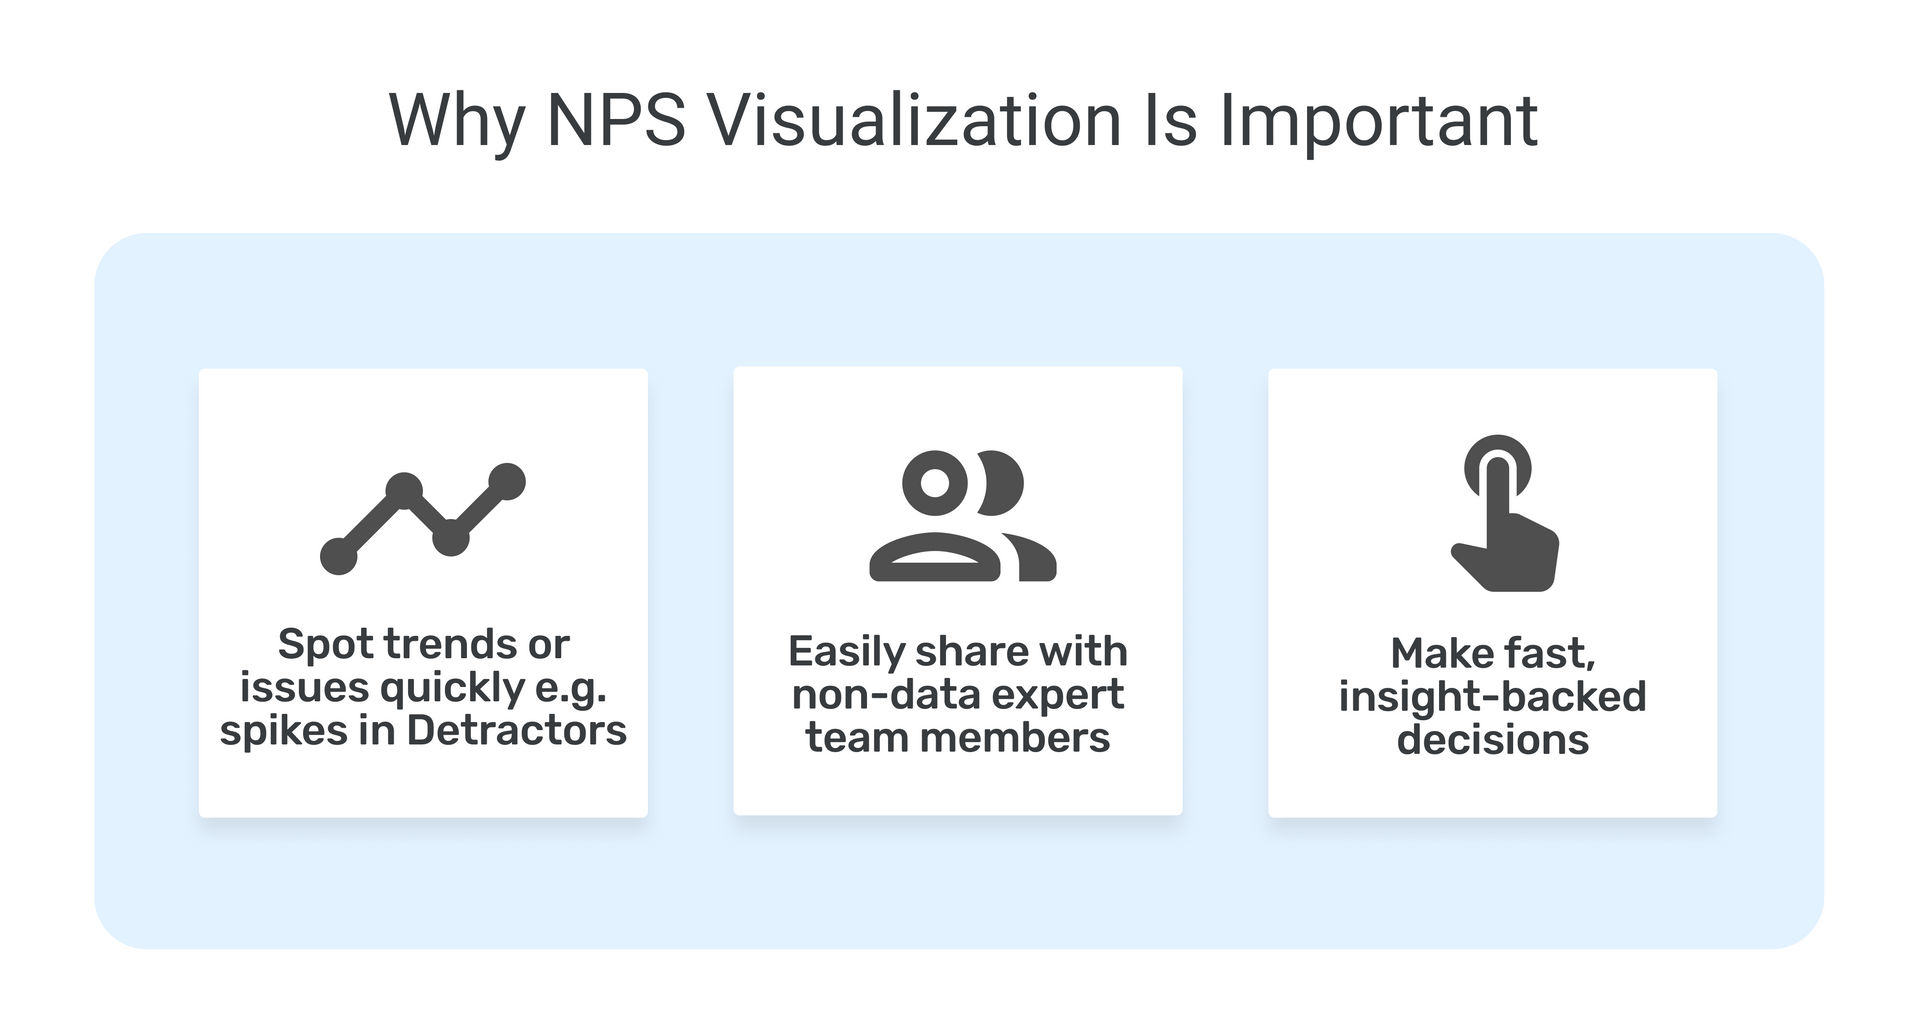 NPS visualization is important as you can discover issues quickly, share across teams, and make fast business decisions.